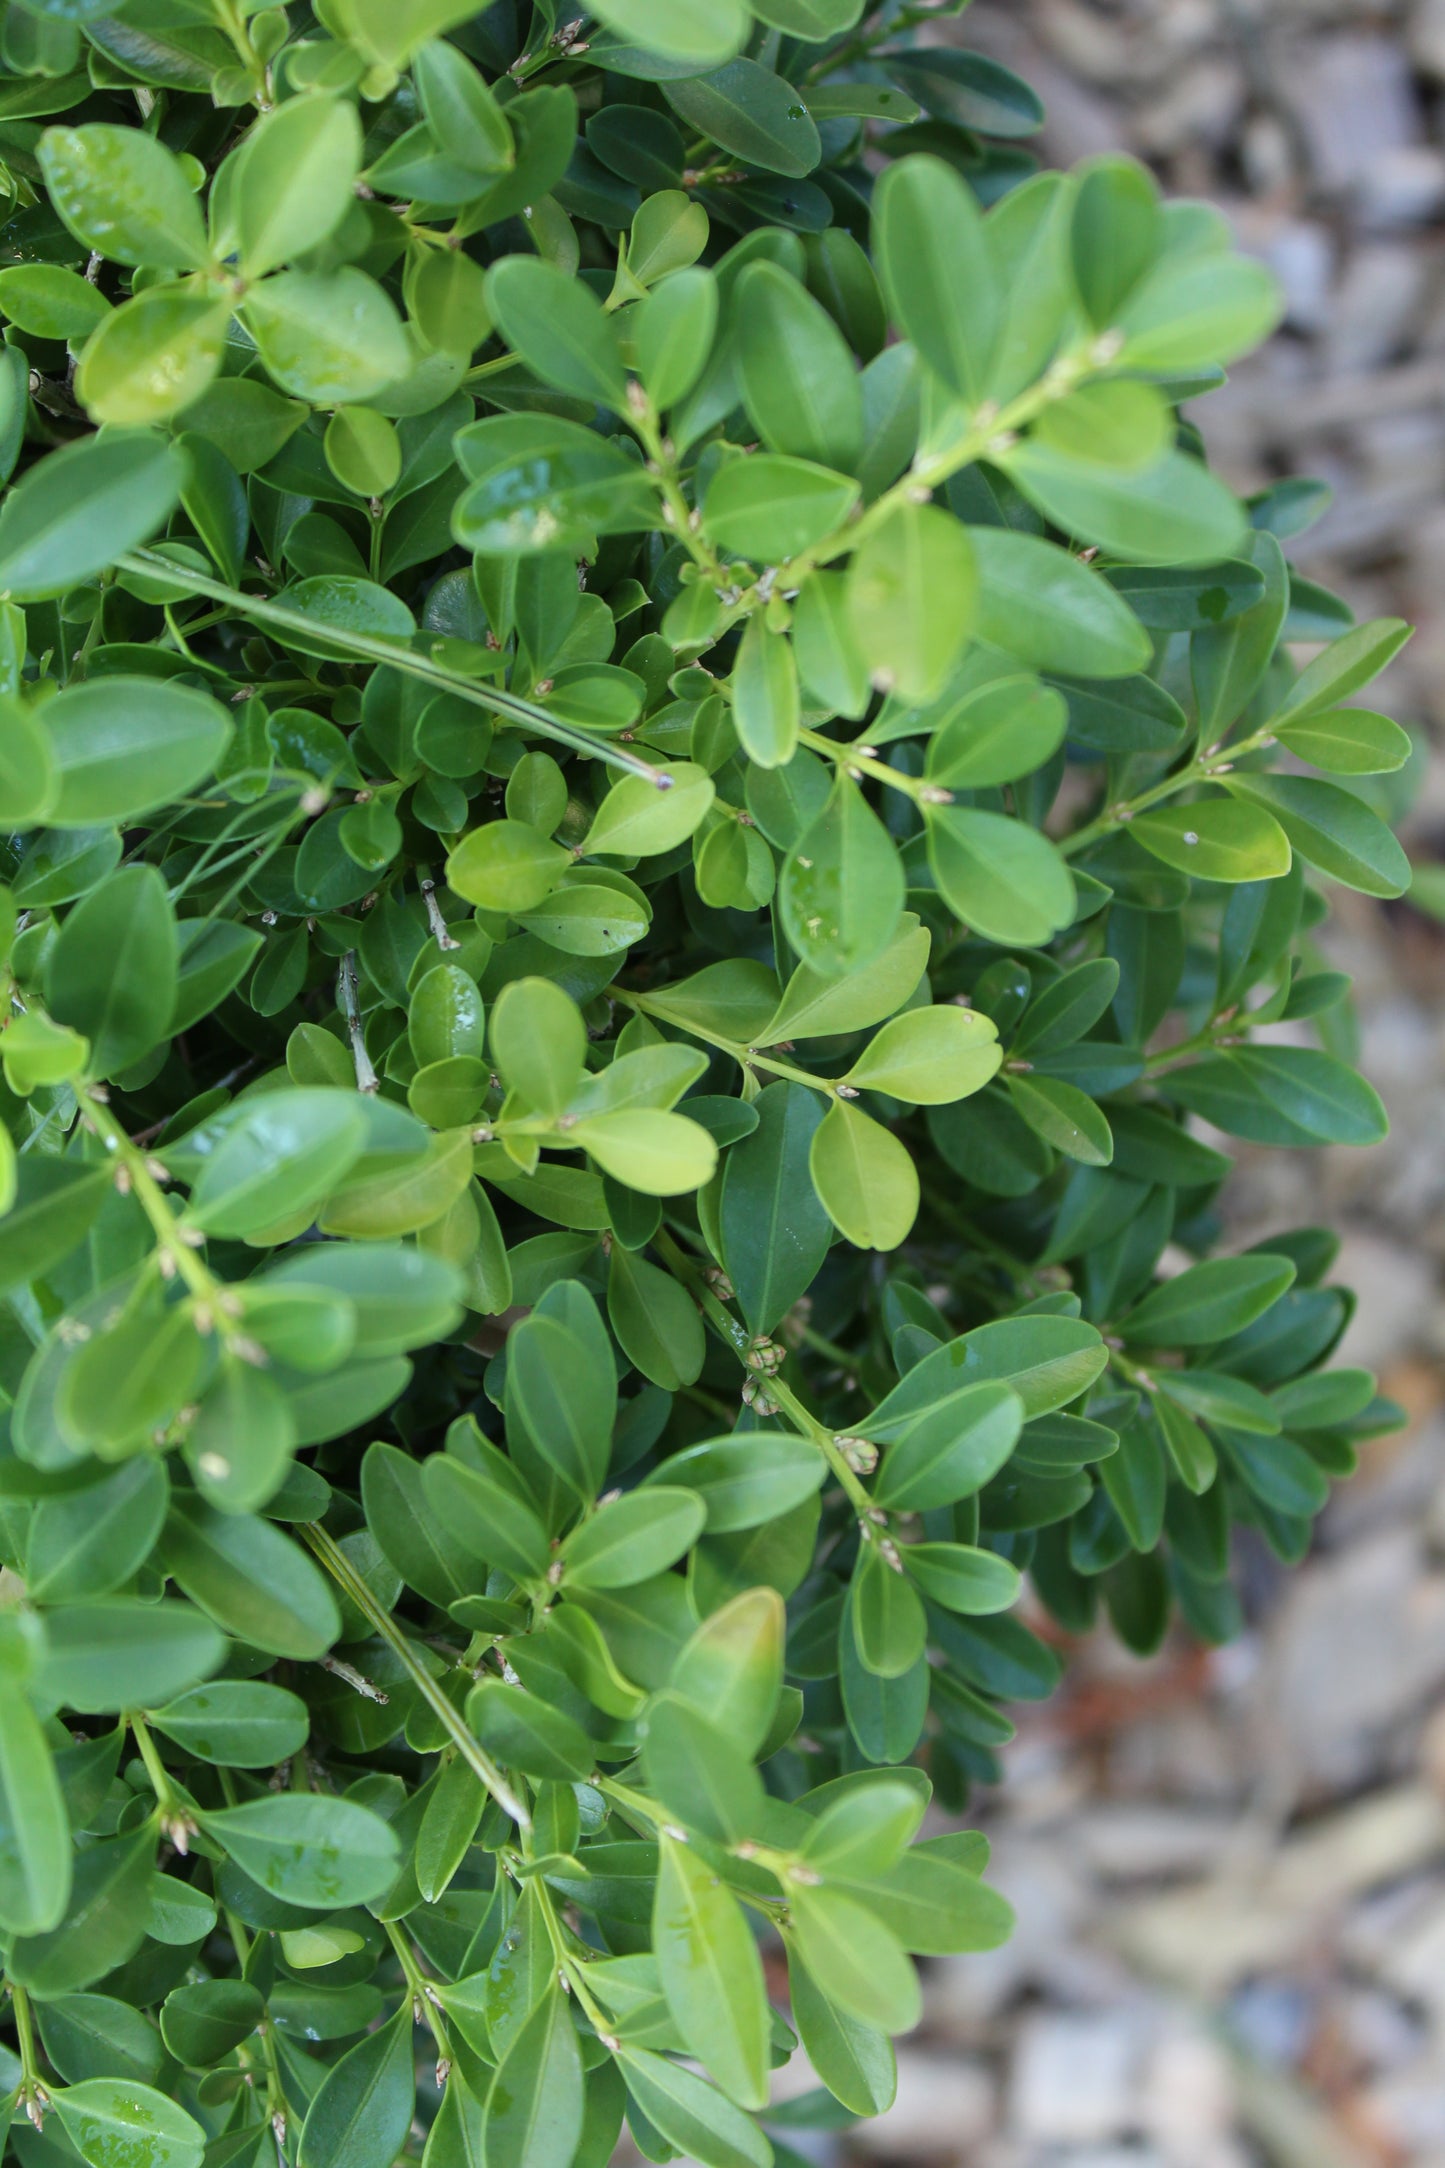 Buxus microphylla Tide Hill 1g